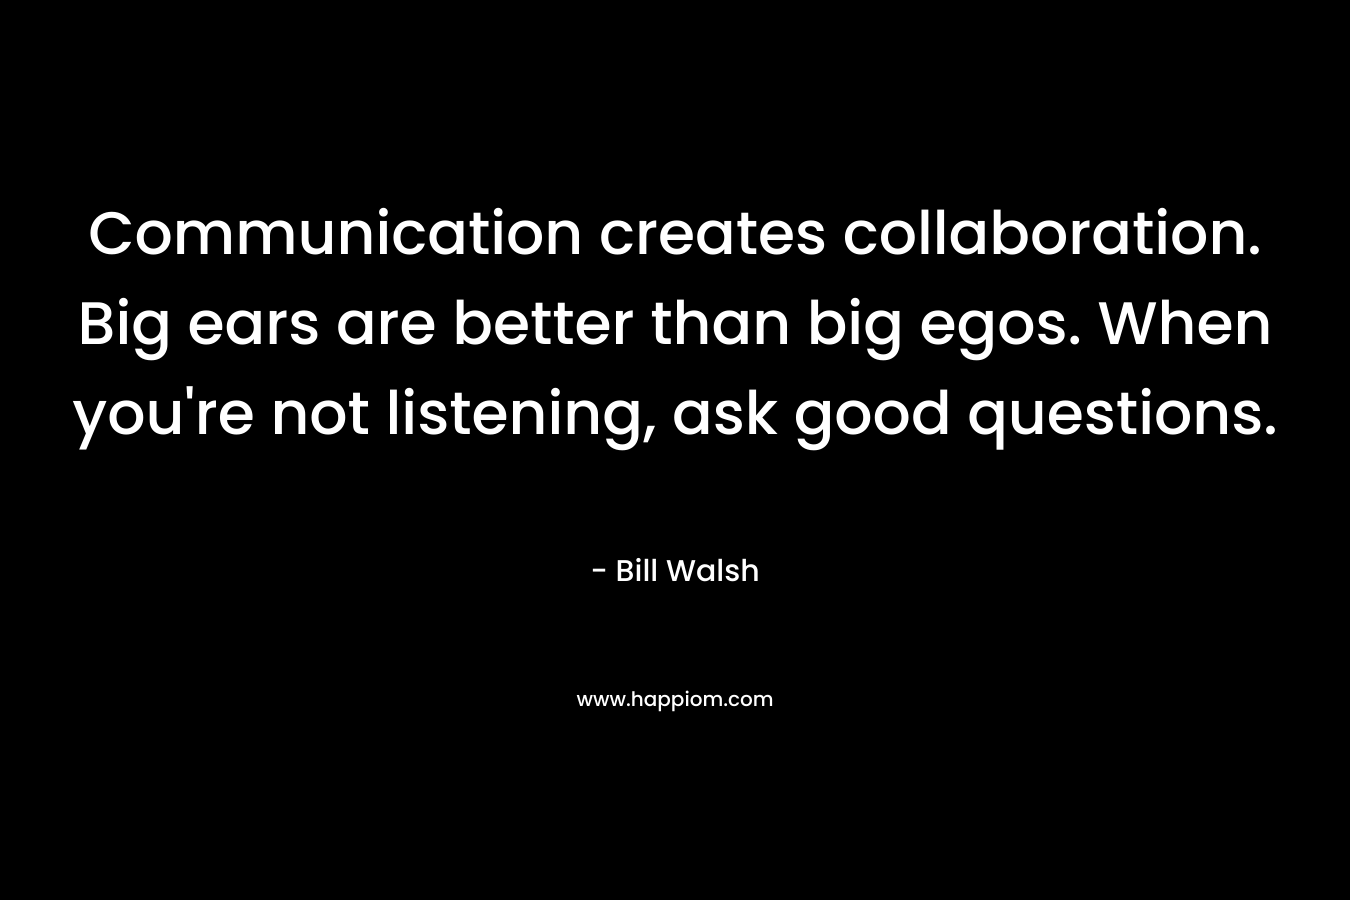 Communication creates collaboration. Big ears are better than big egos. When you’re not listening, ask good questions. – Bill Walsh